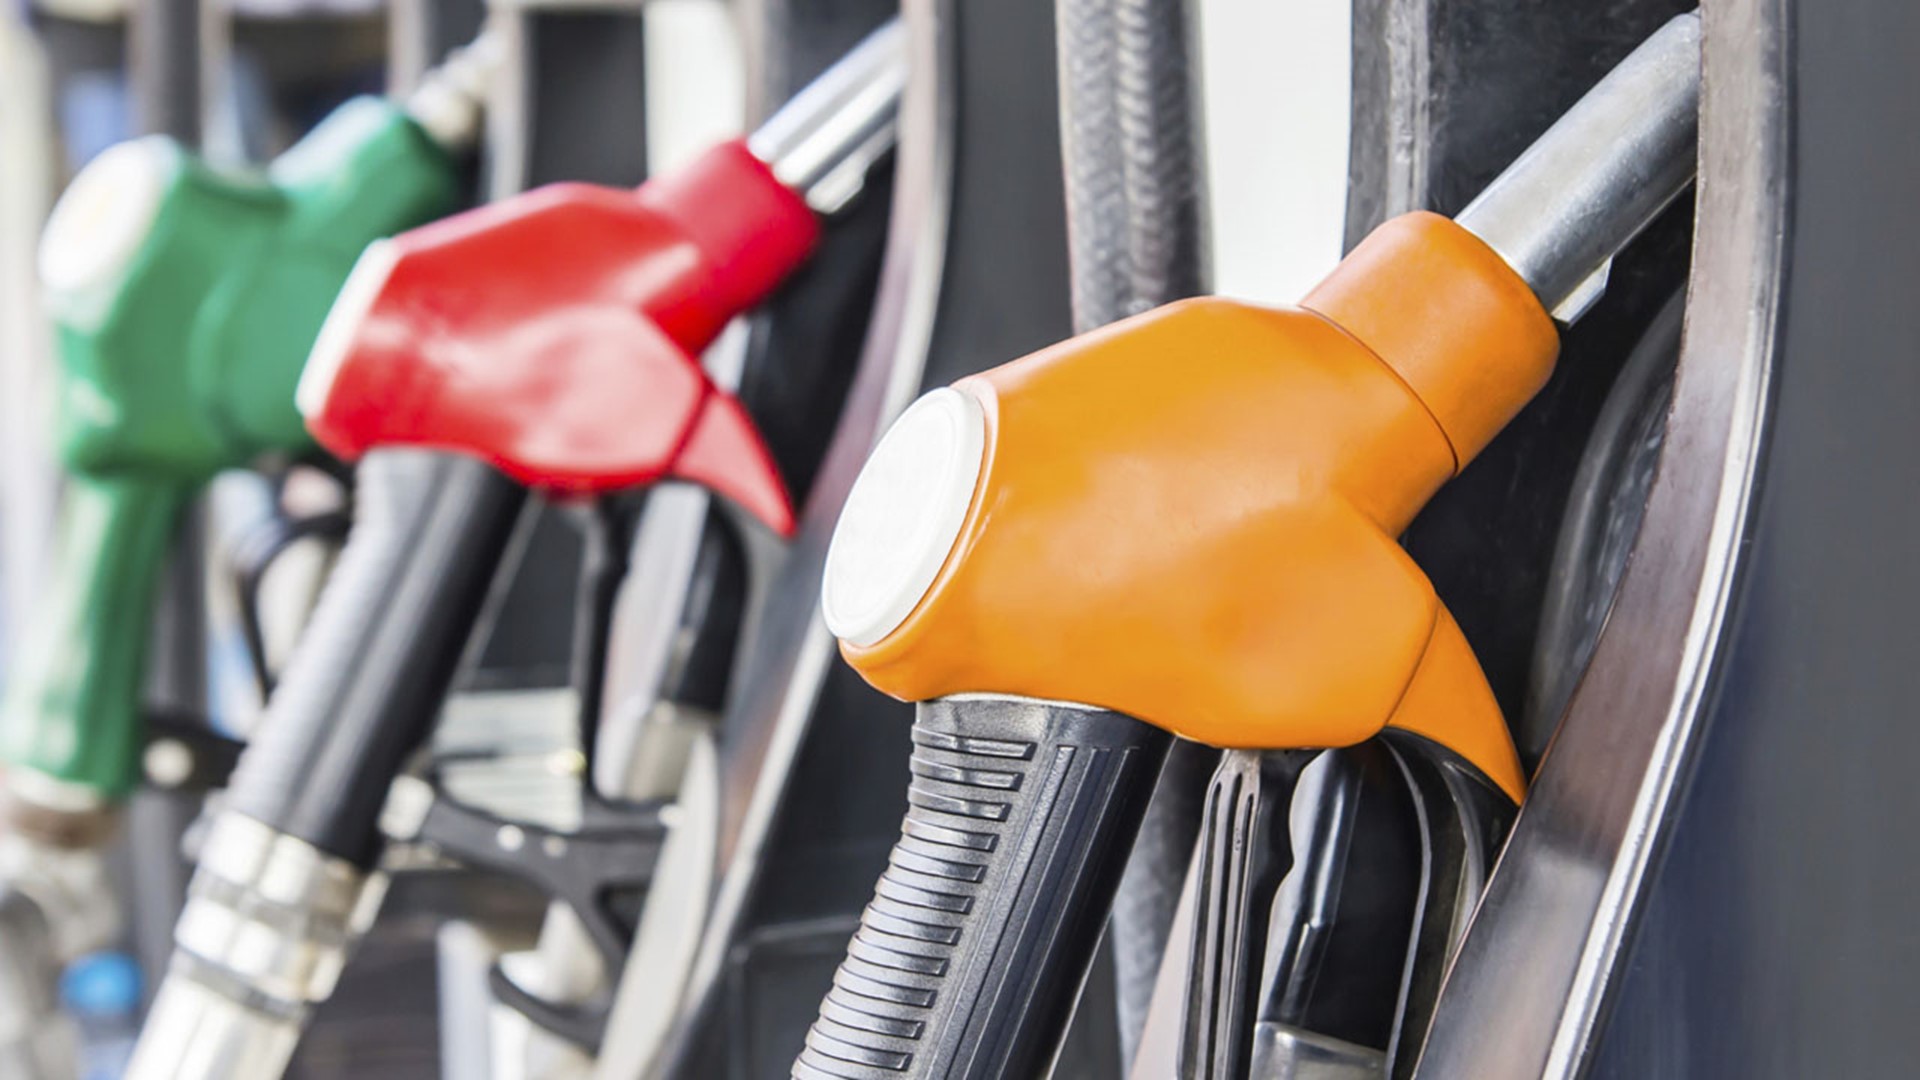 According to AAA, the state average jumped 12 cents per gallon setting a new high of $3.62 per gallon.